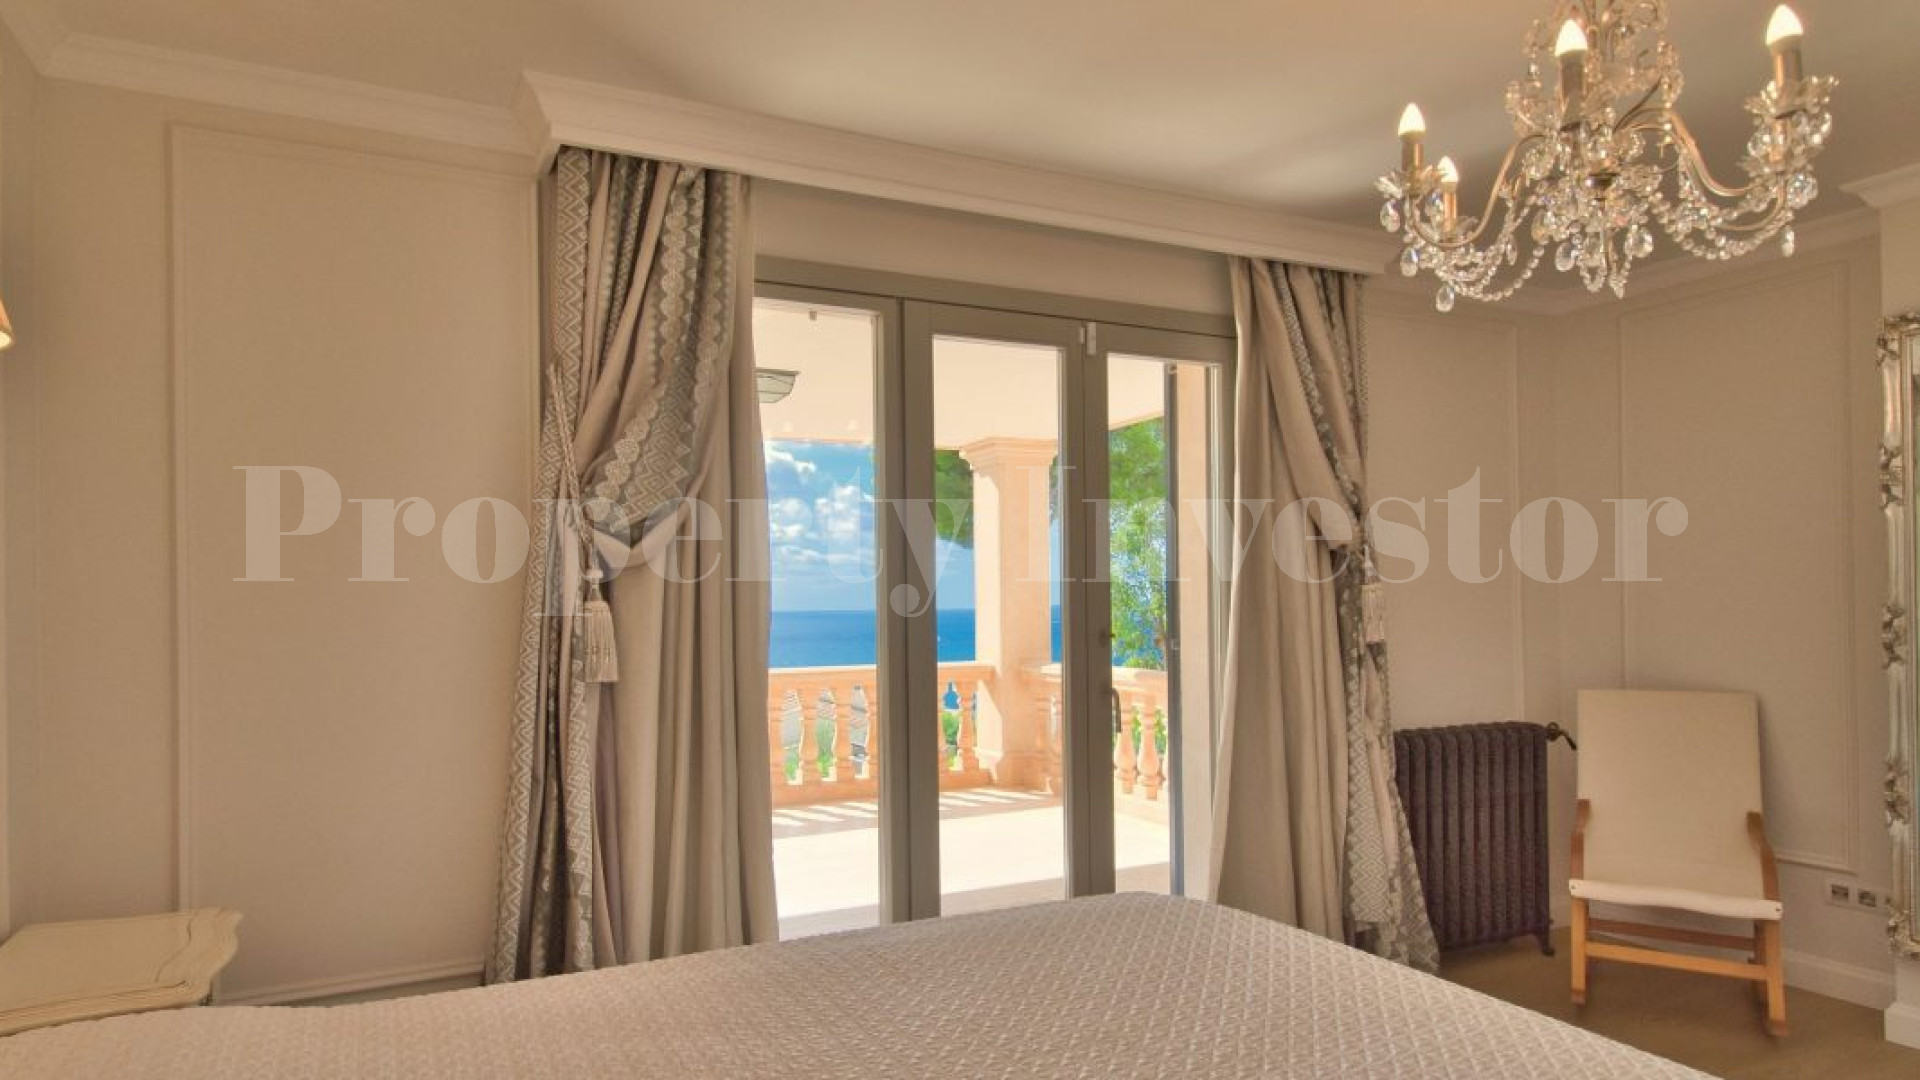 Exquisite 7 Bedroom Luxury Villa with Old World Feeling in Old Bendinat, Mallorca